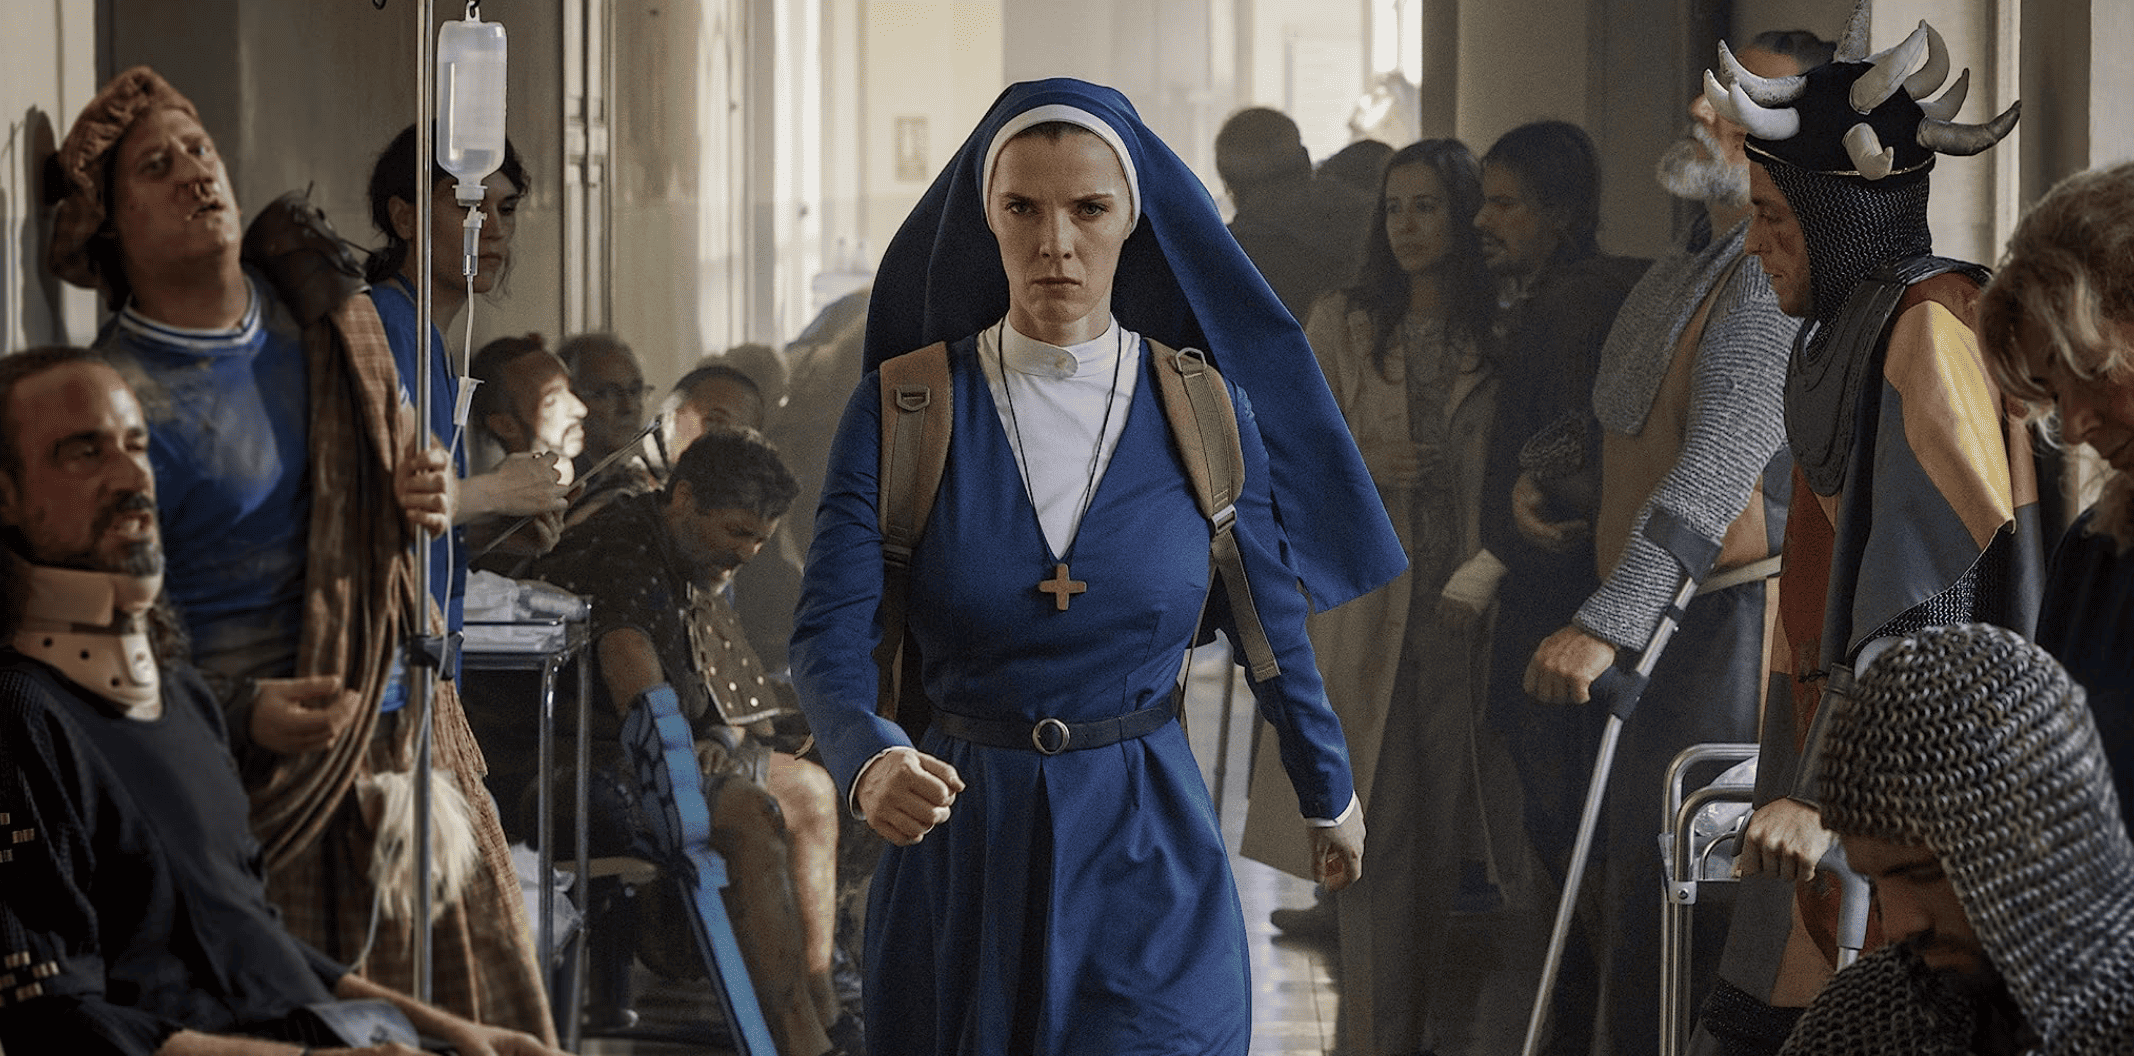 Betty Gilpin defiantly walks through a hospital full of odd-looking characters, including someone who appears to be a knight in this image from Warner Bros. Television.